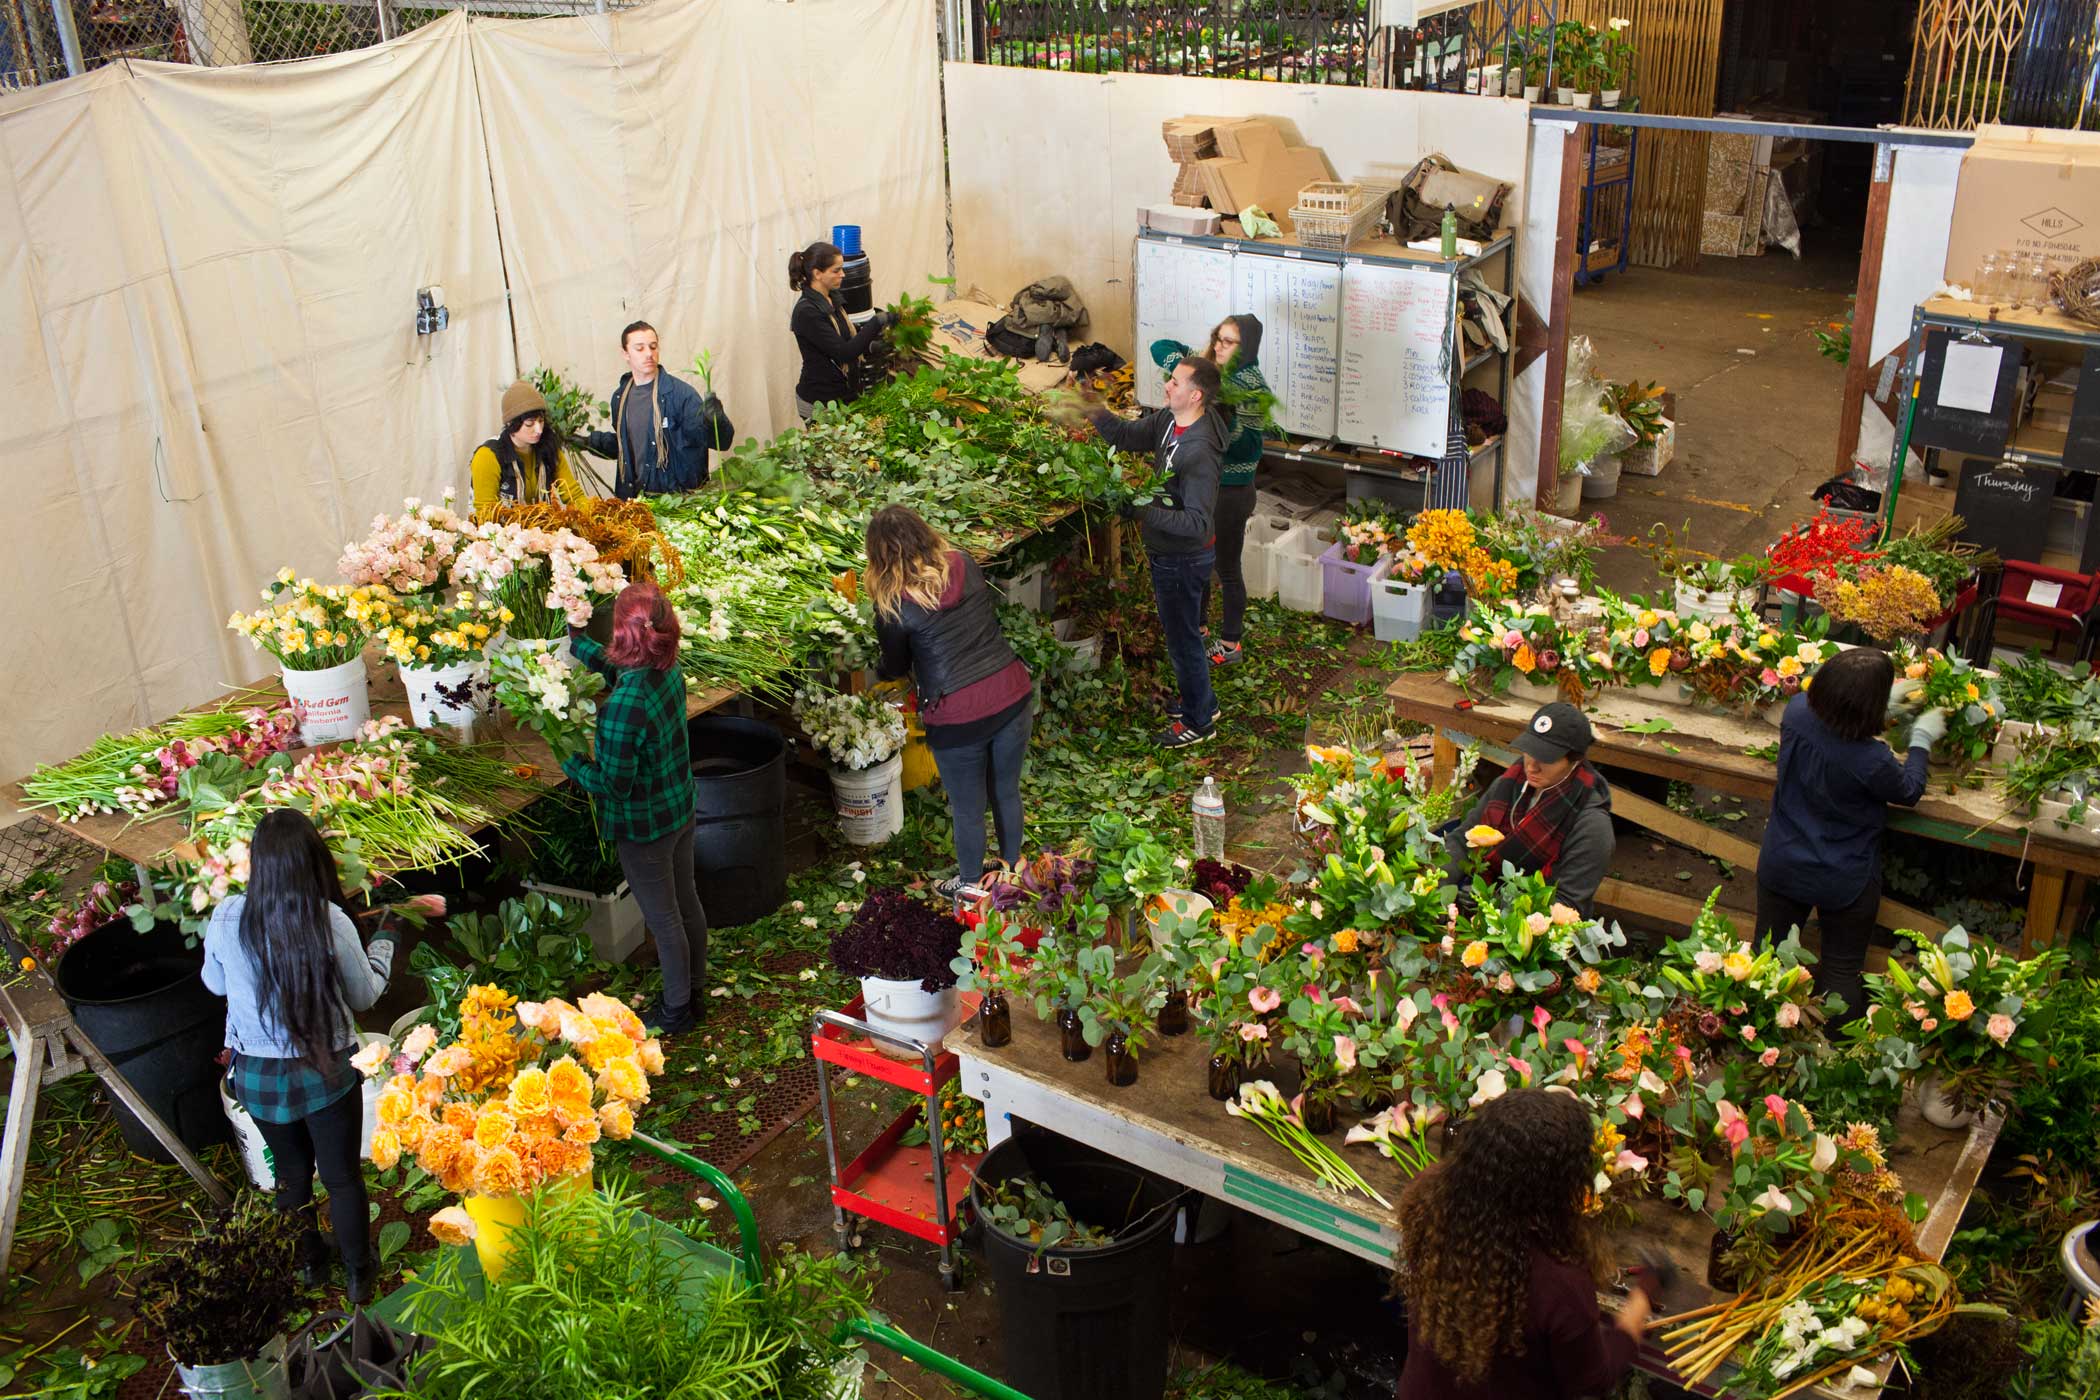 Employees sort flowers into bouquets at Farmgirl Flowers in San Francisco on Nov. 10, 2015.